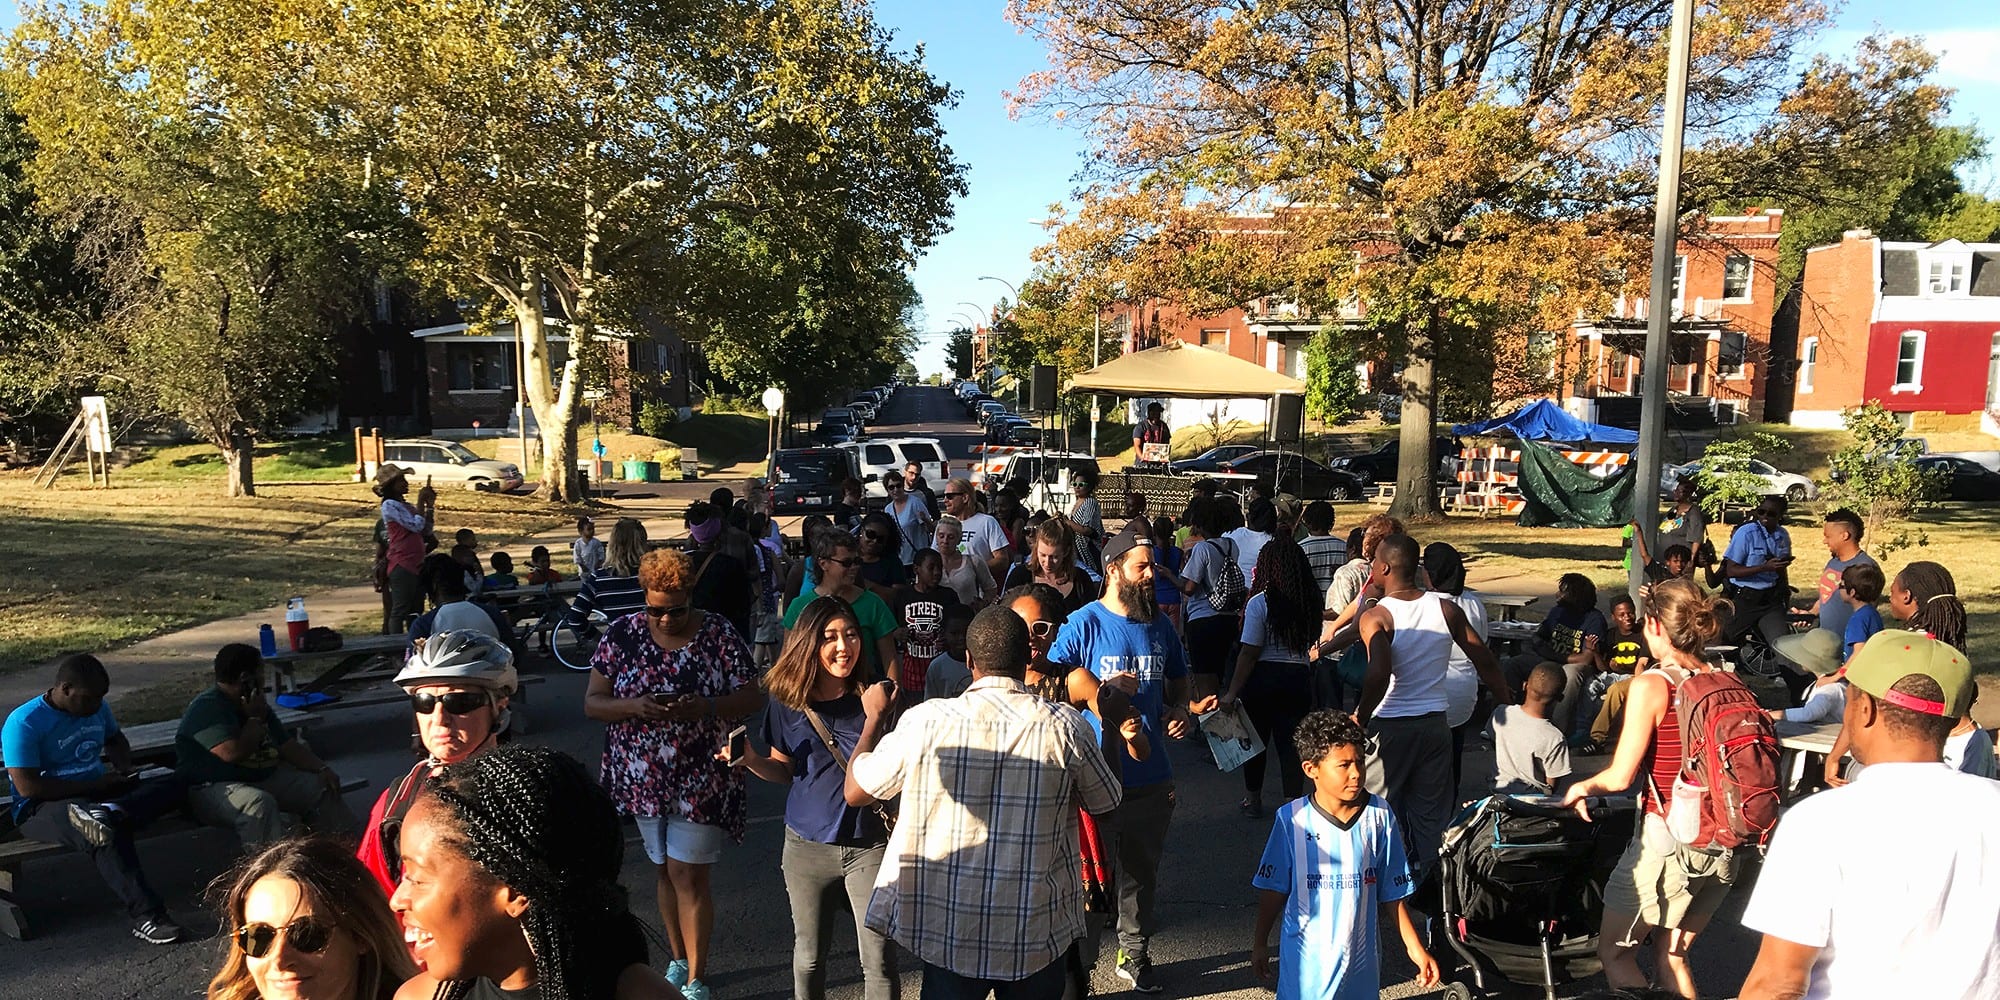 Crowds gather at the 2017 Common Sound Festival in Marquette Park in Dutchtown, St. Louis.